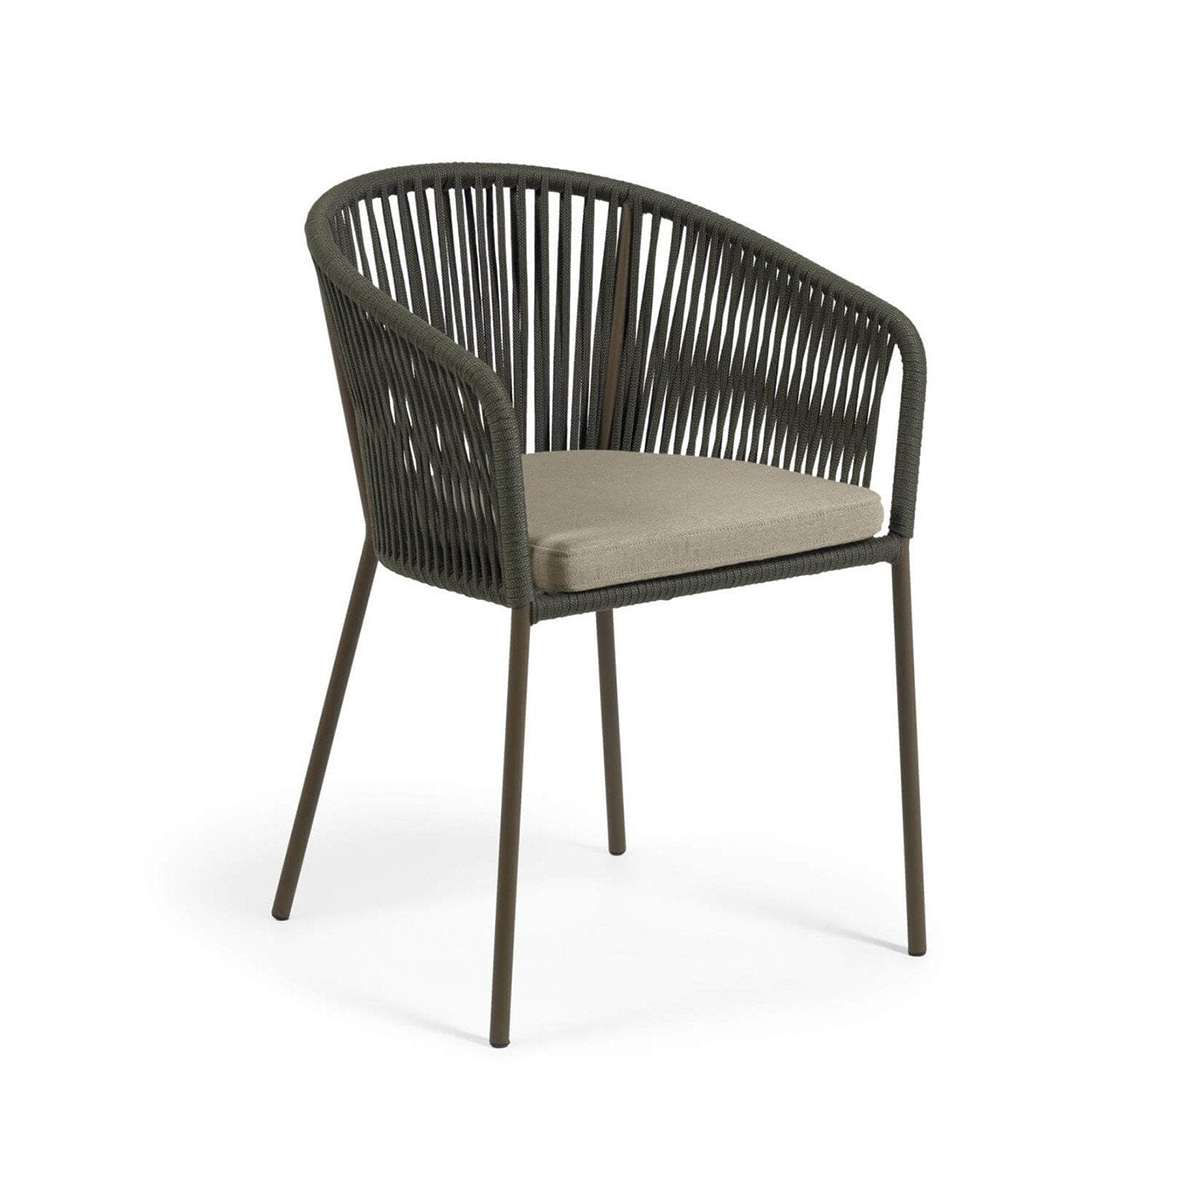 FondHouse Jonas Rope Dining Chair in Green